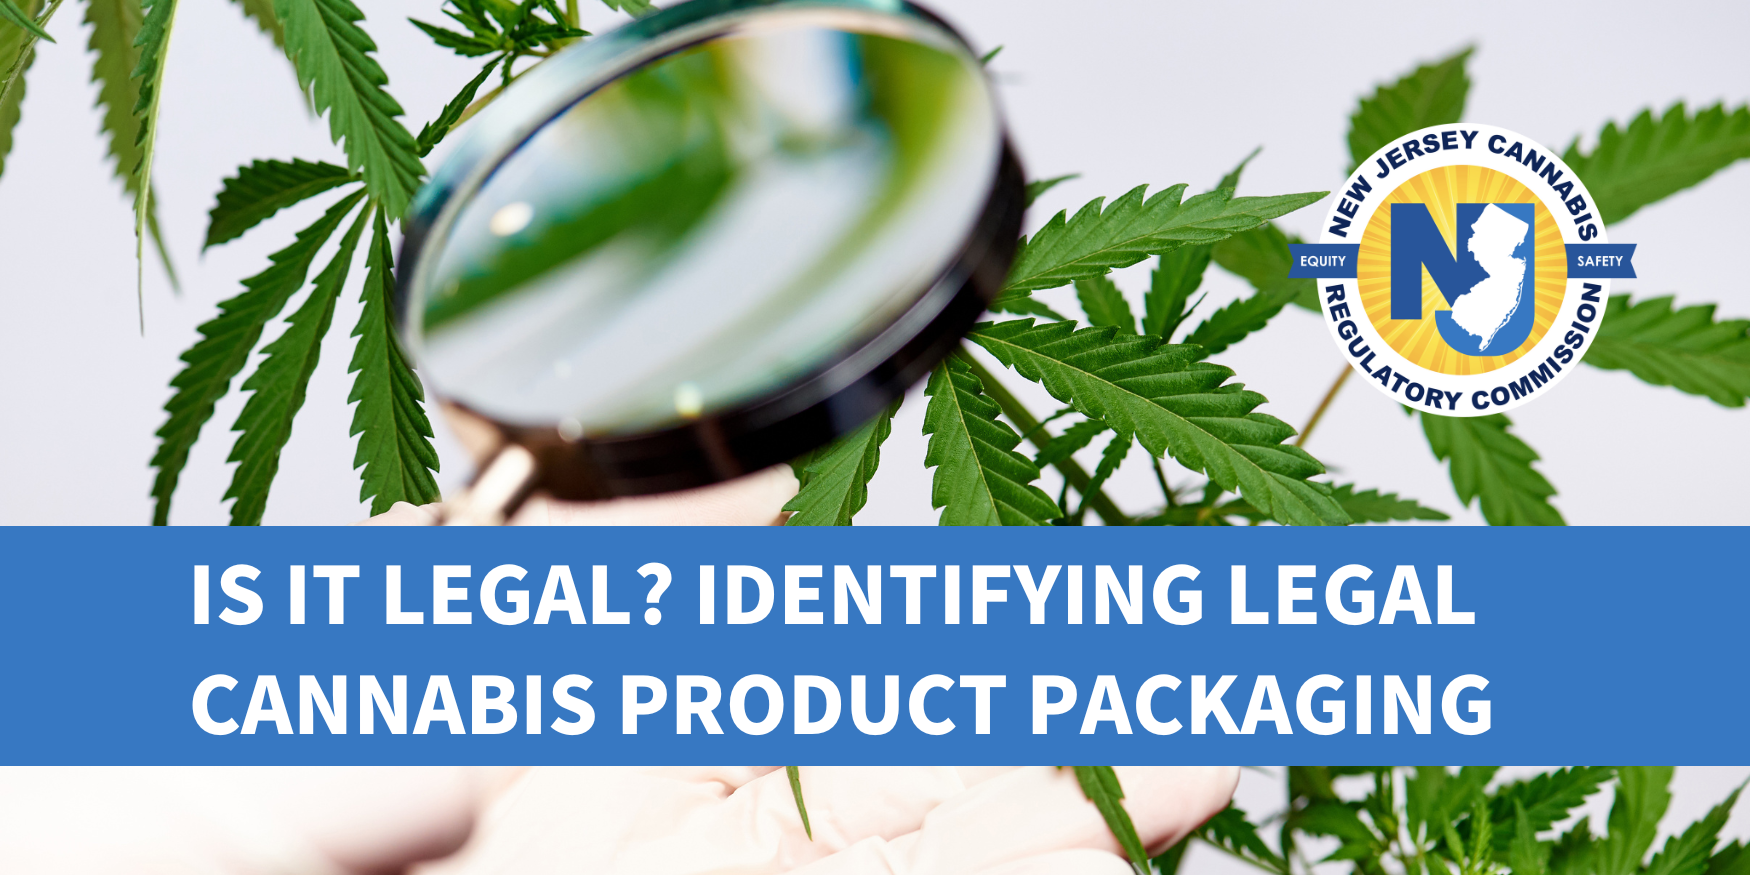 How to Identify Legal Cannabis Products